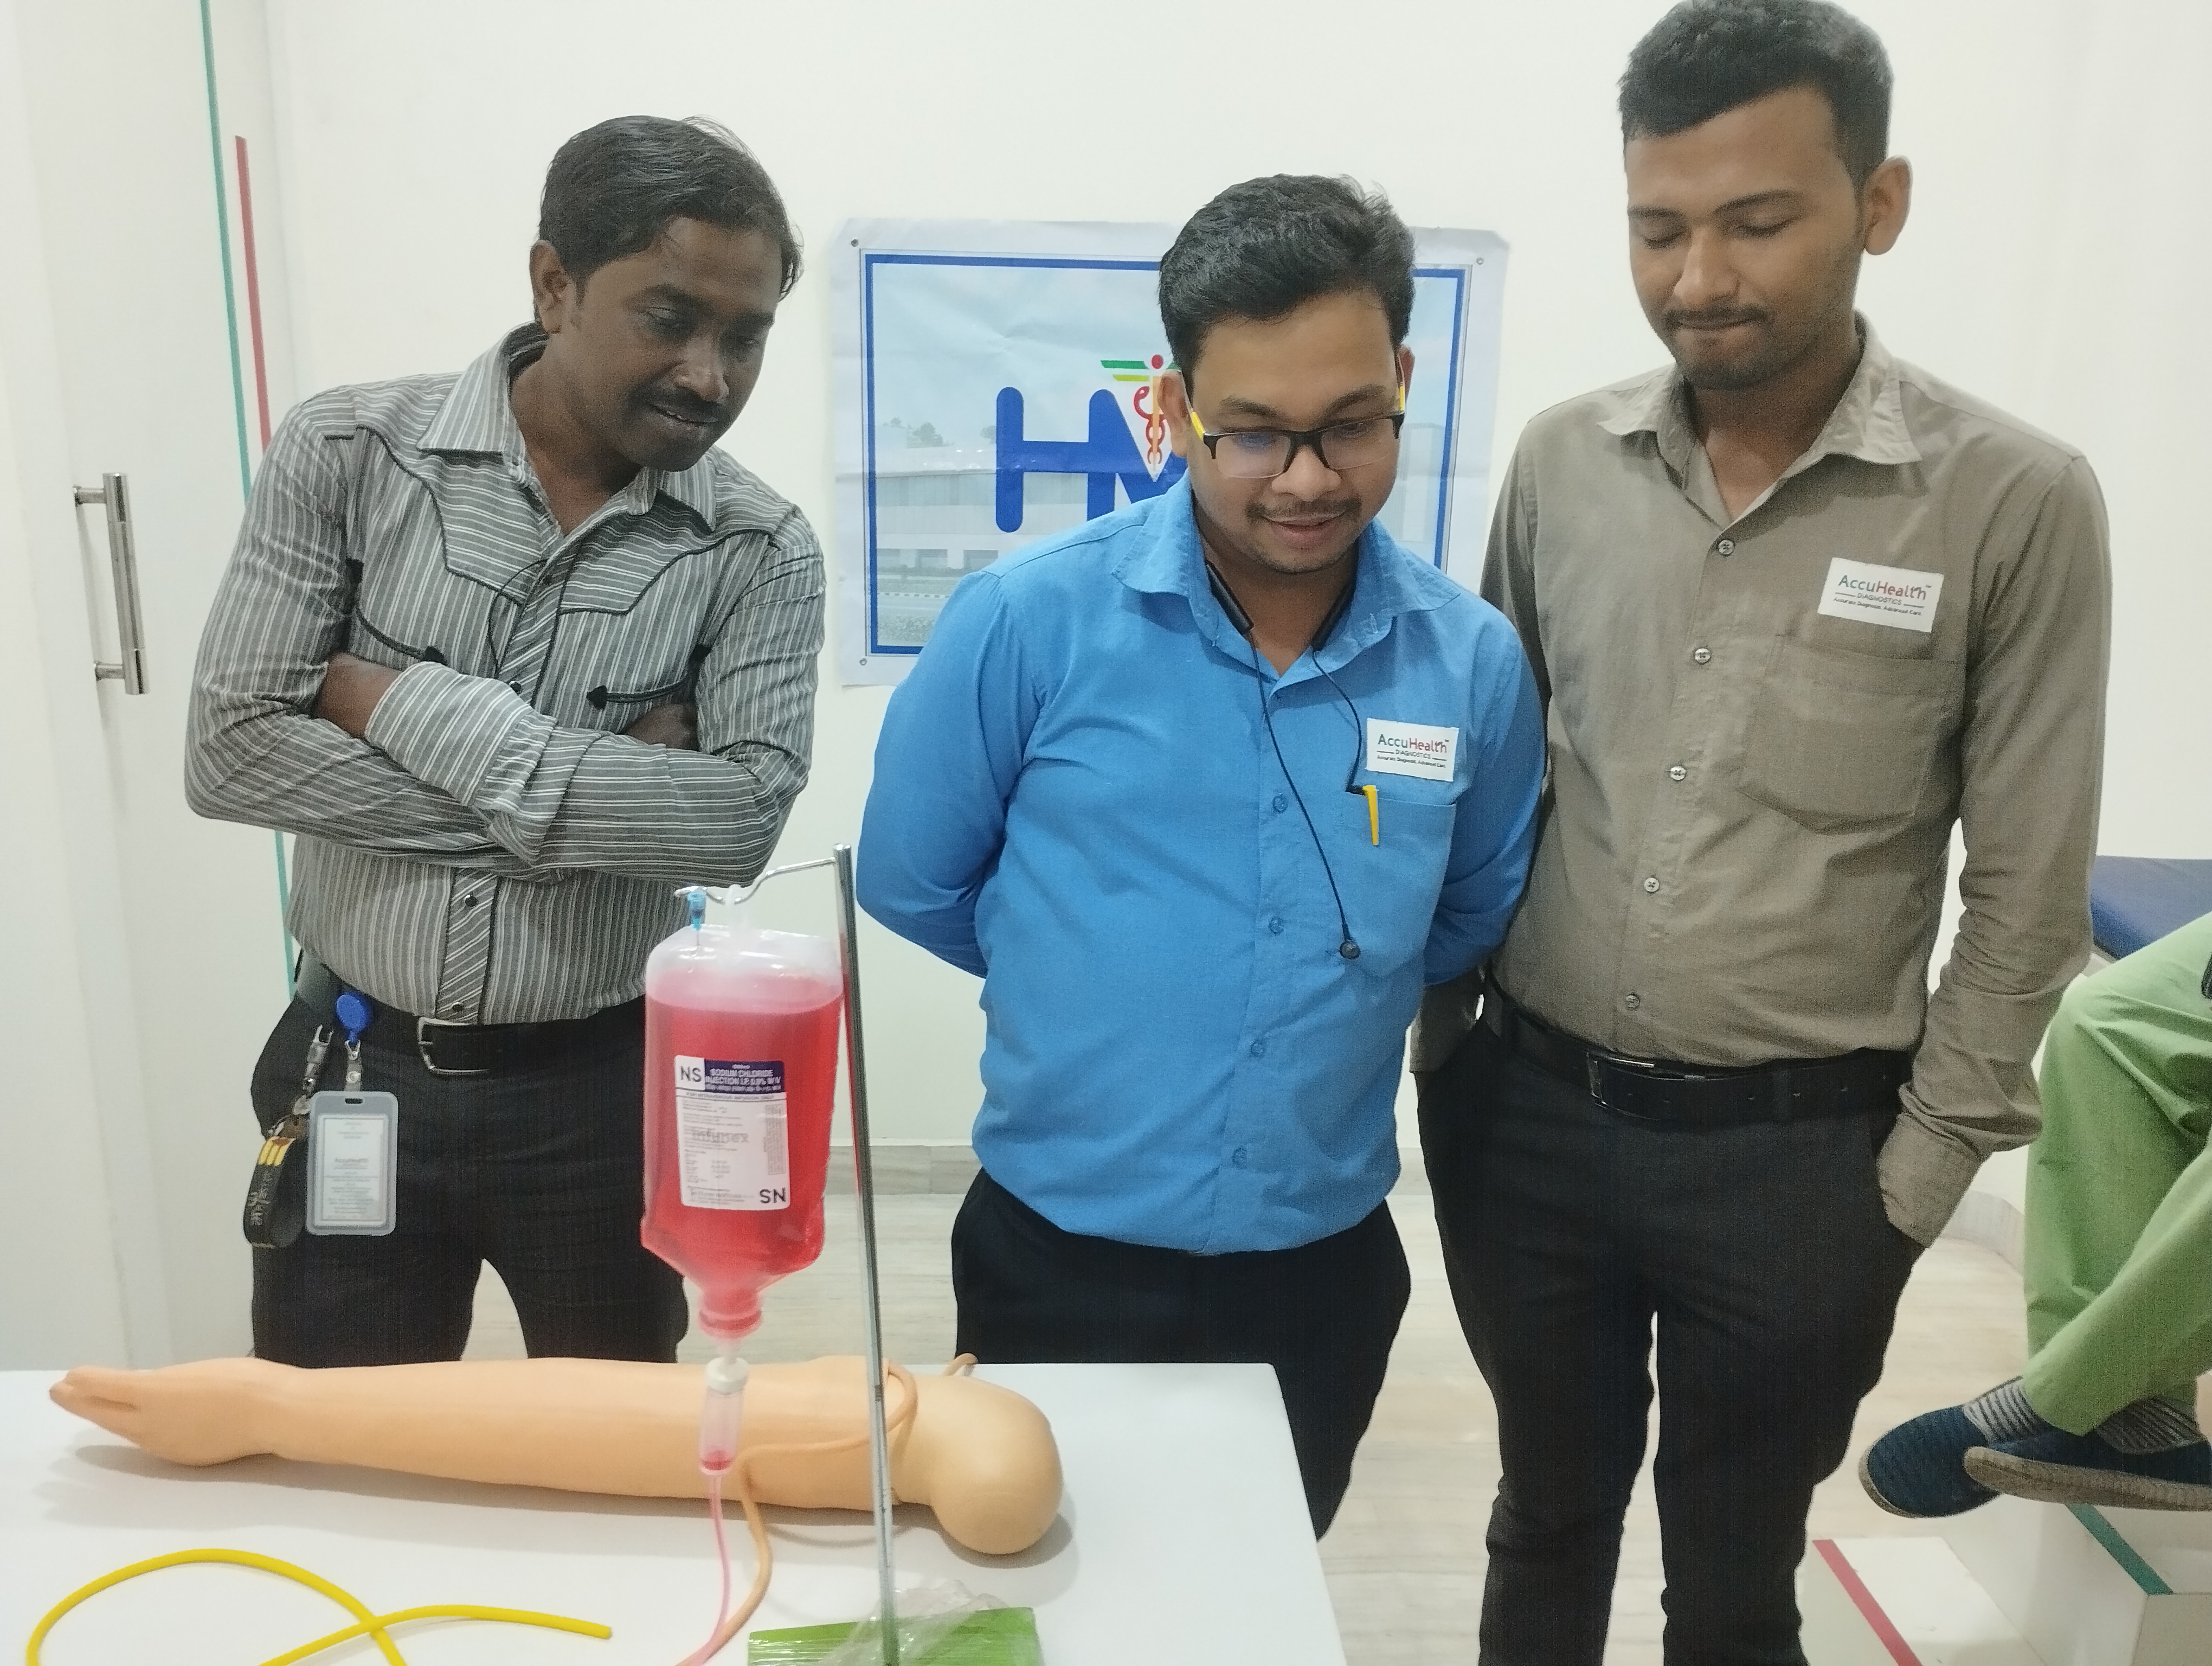 Blood Collection Procedure with Artifical Arm and Safe Injection Practice - Accuhealth Diagnostic Centre, Rajdanga, Kolkata 